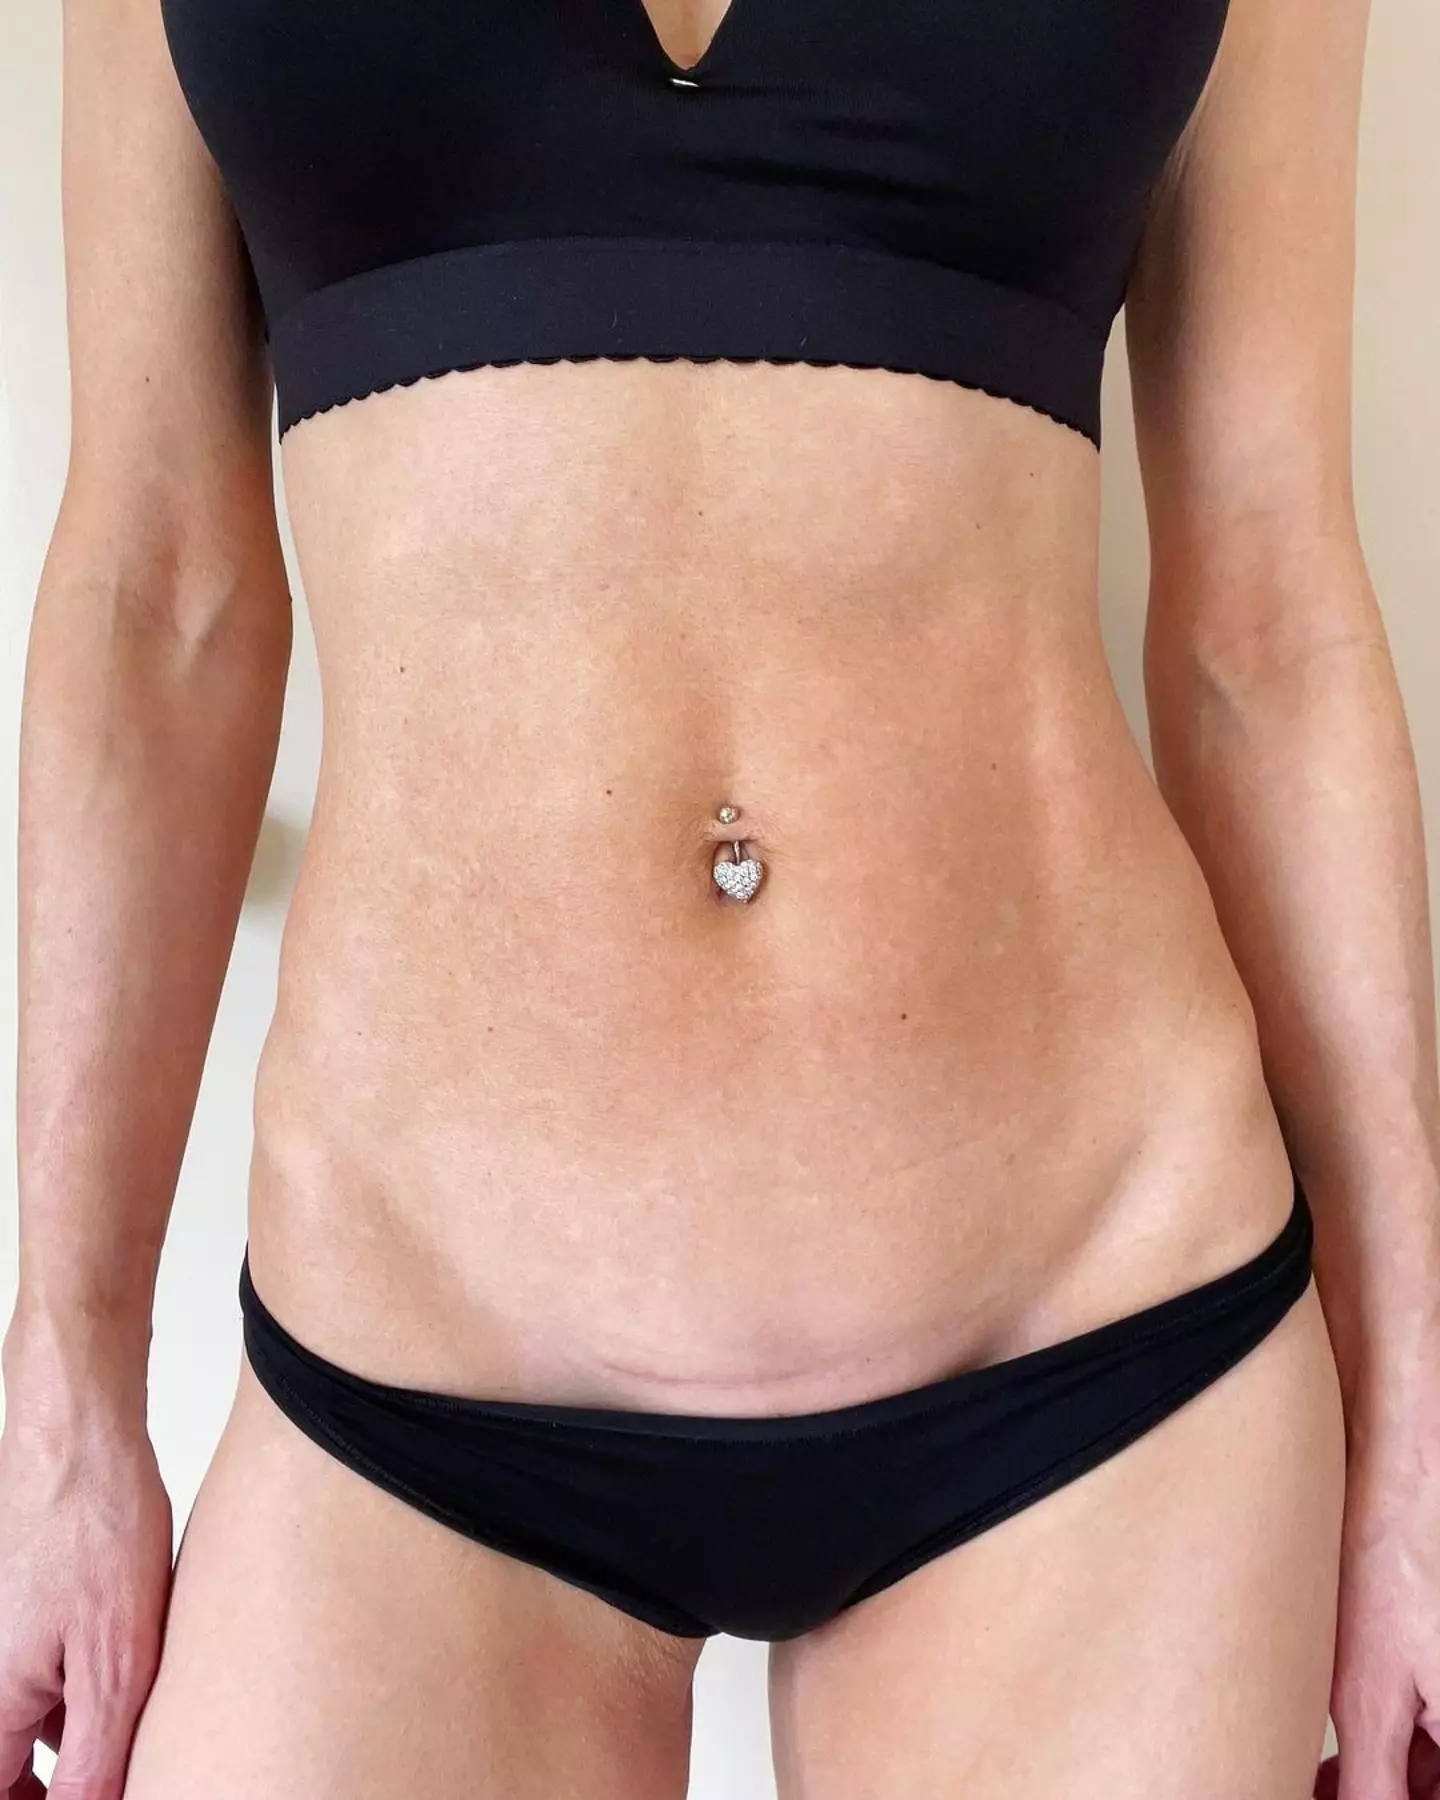 Kate Lawler shared a picture of her c-section scar. (